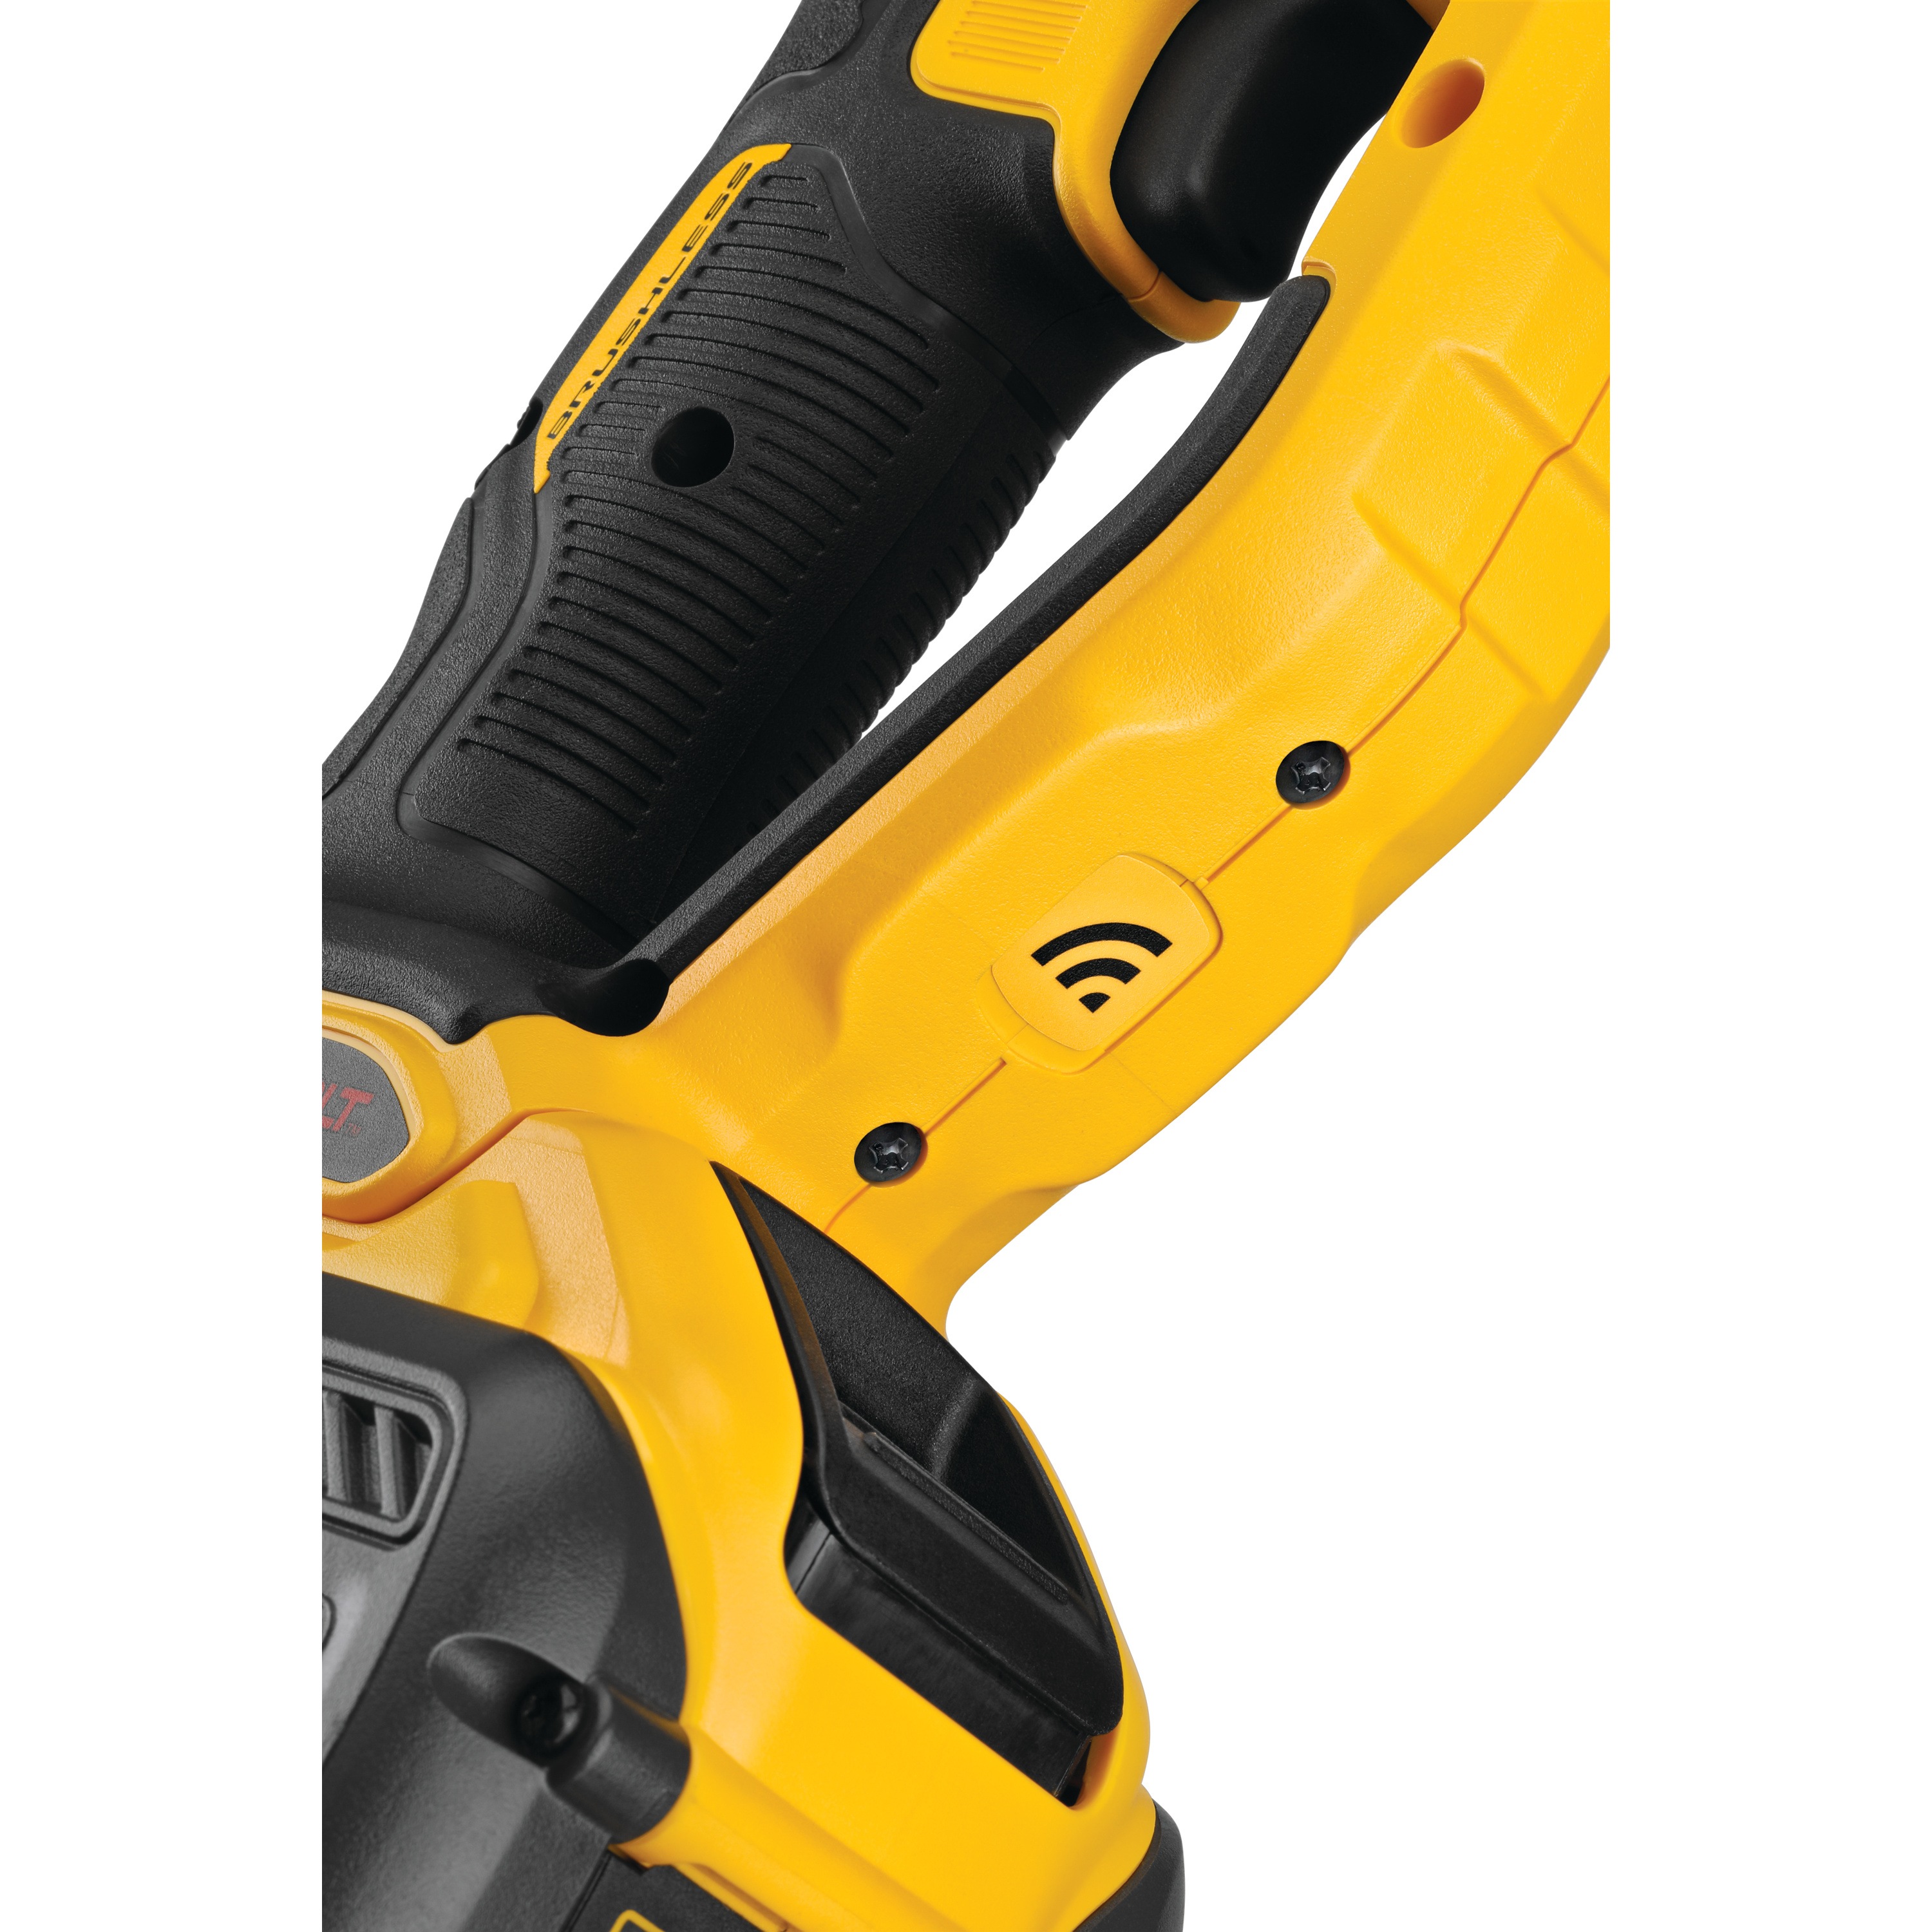 Tracking and locating features of brushless cordless quick-change stud and joist drill.